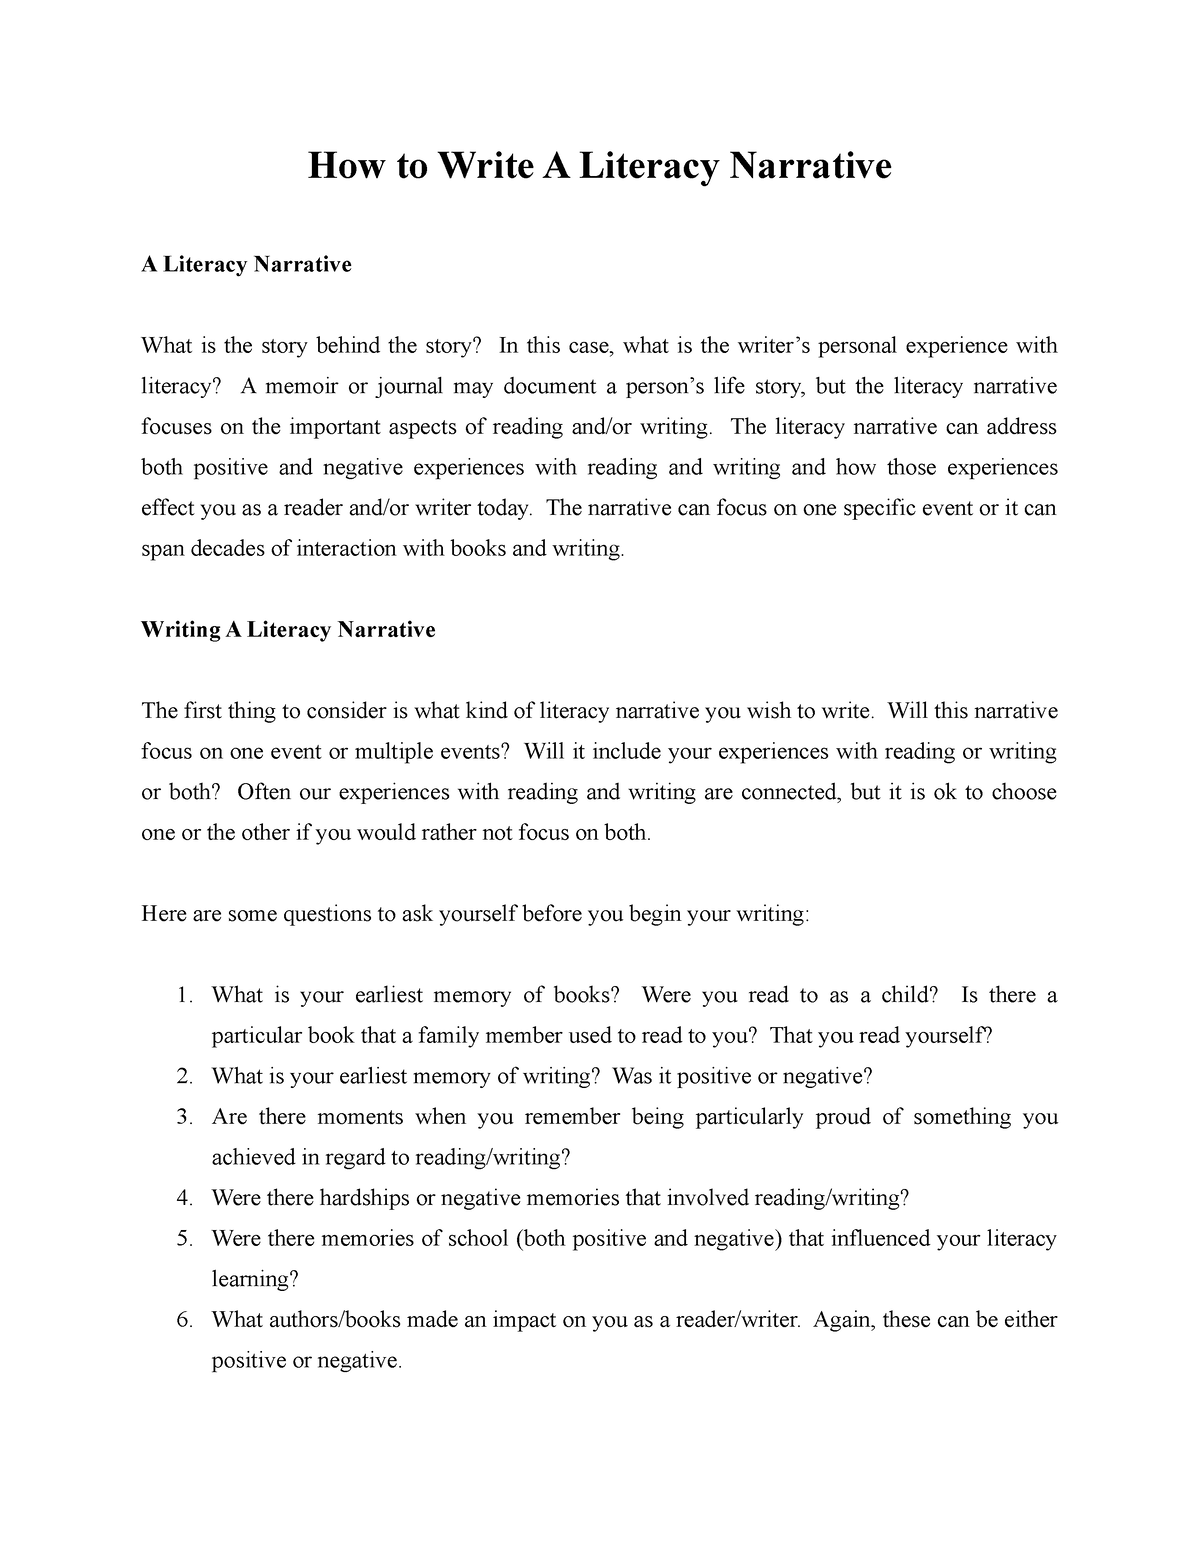 How to Write A Literacy Narrative - The literacy narrative can address ...